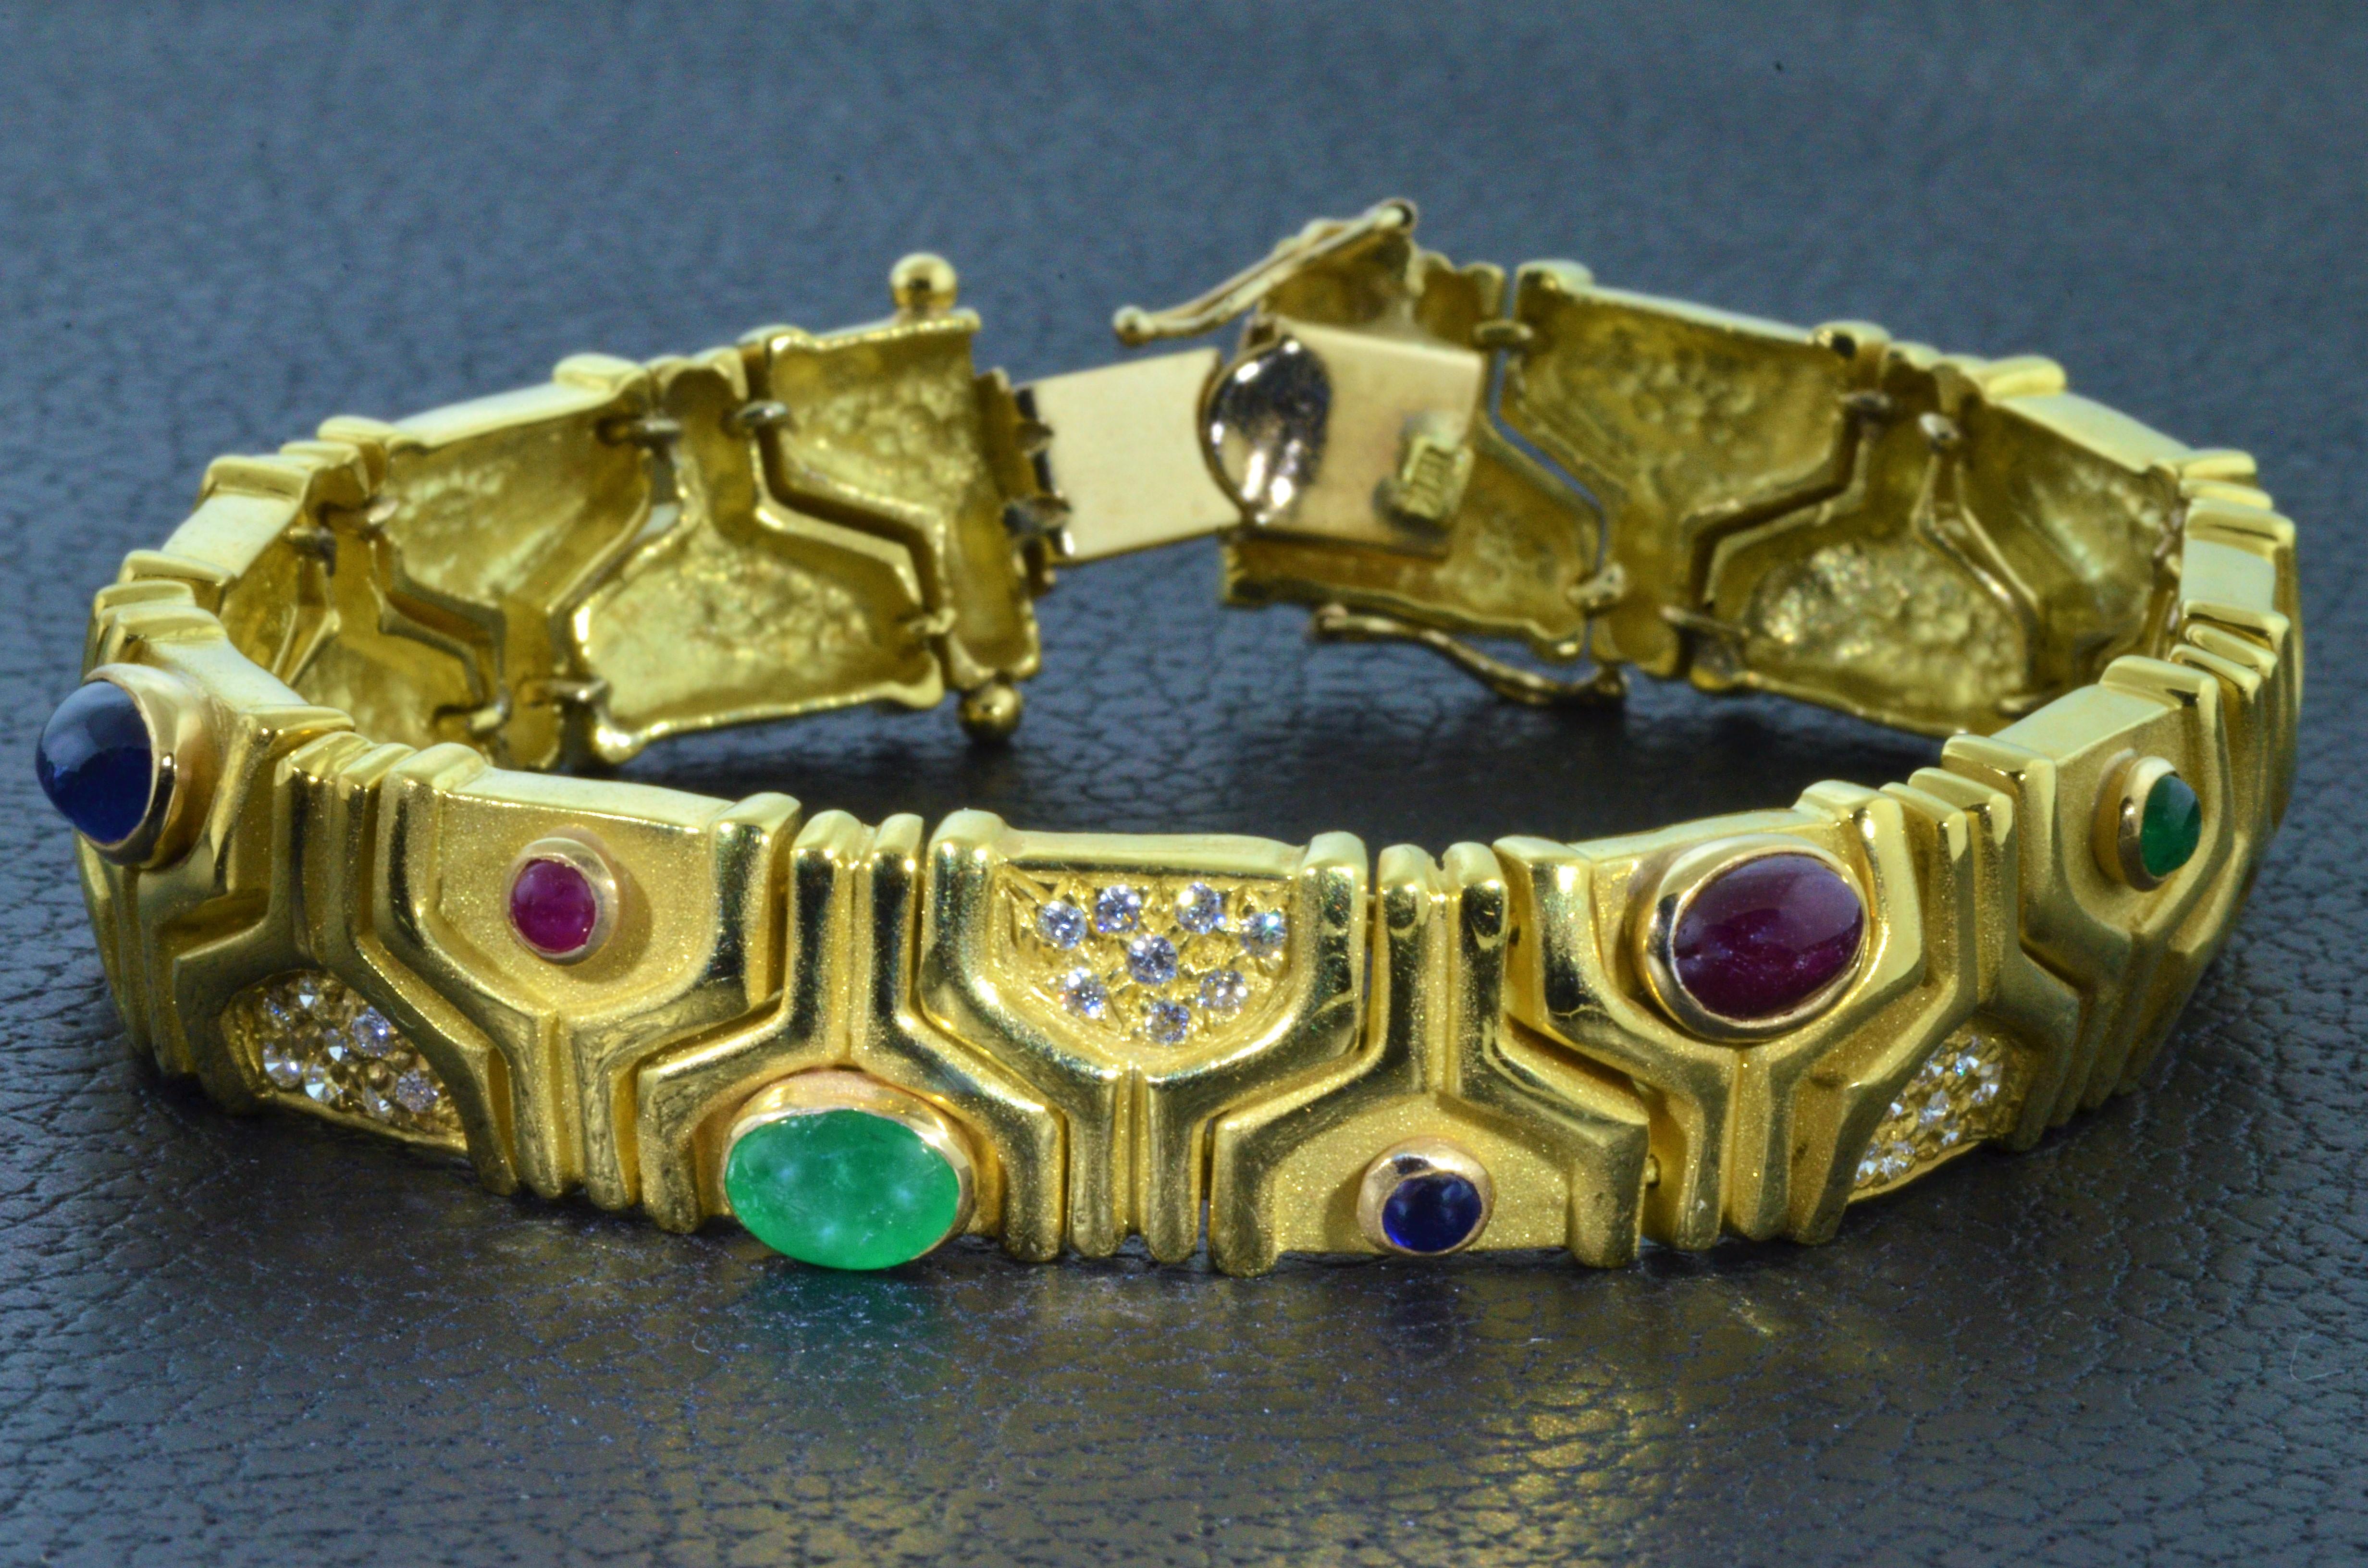 Vintage Retro Modern 1960's bracelet set with Cabochon Ruby, Emerald, Sapphire and 0.52 carats of diamonds